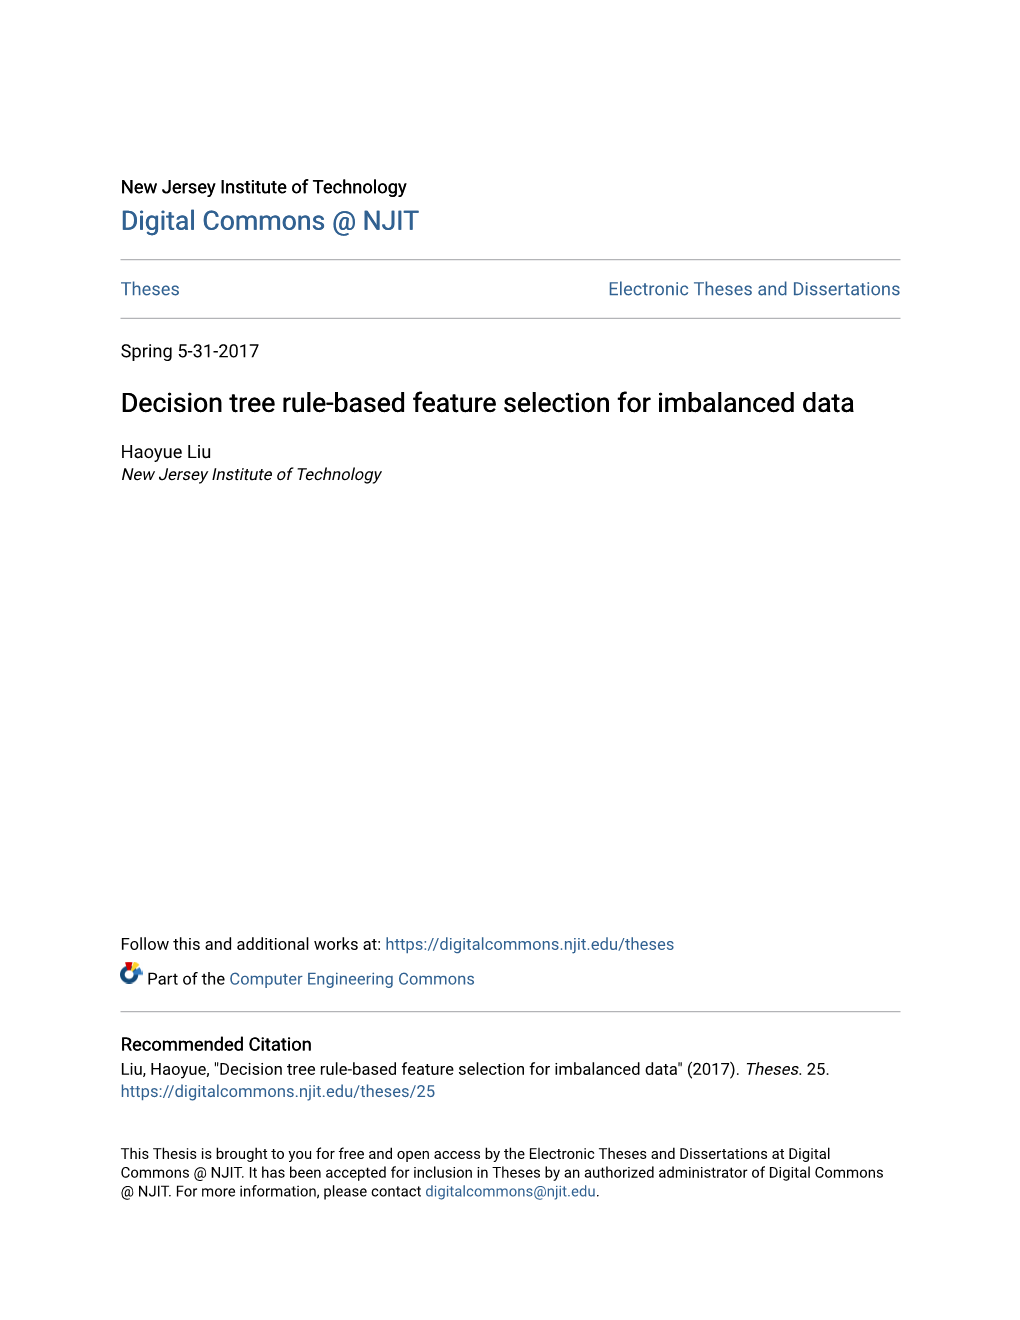 Decision Tree Rule-Based Feature Selection for Imbalanced Data